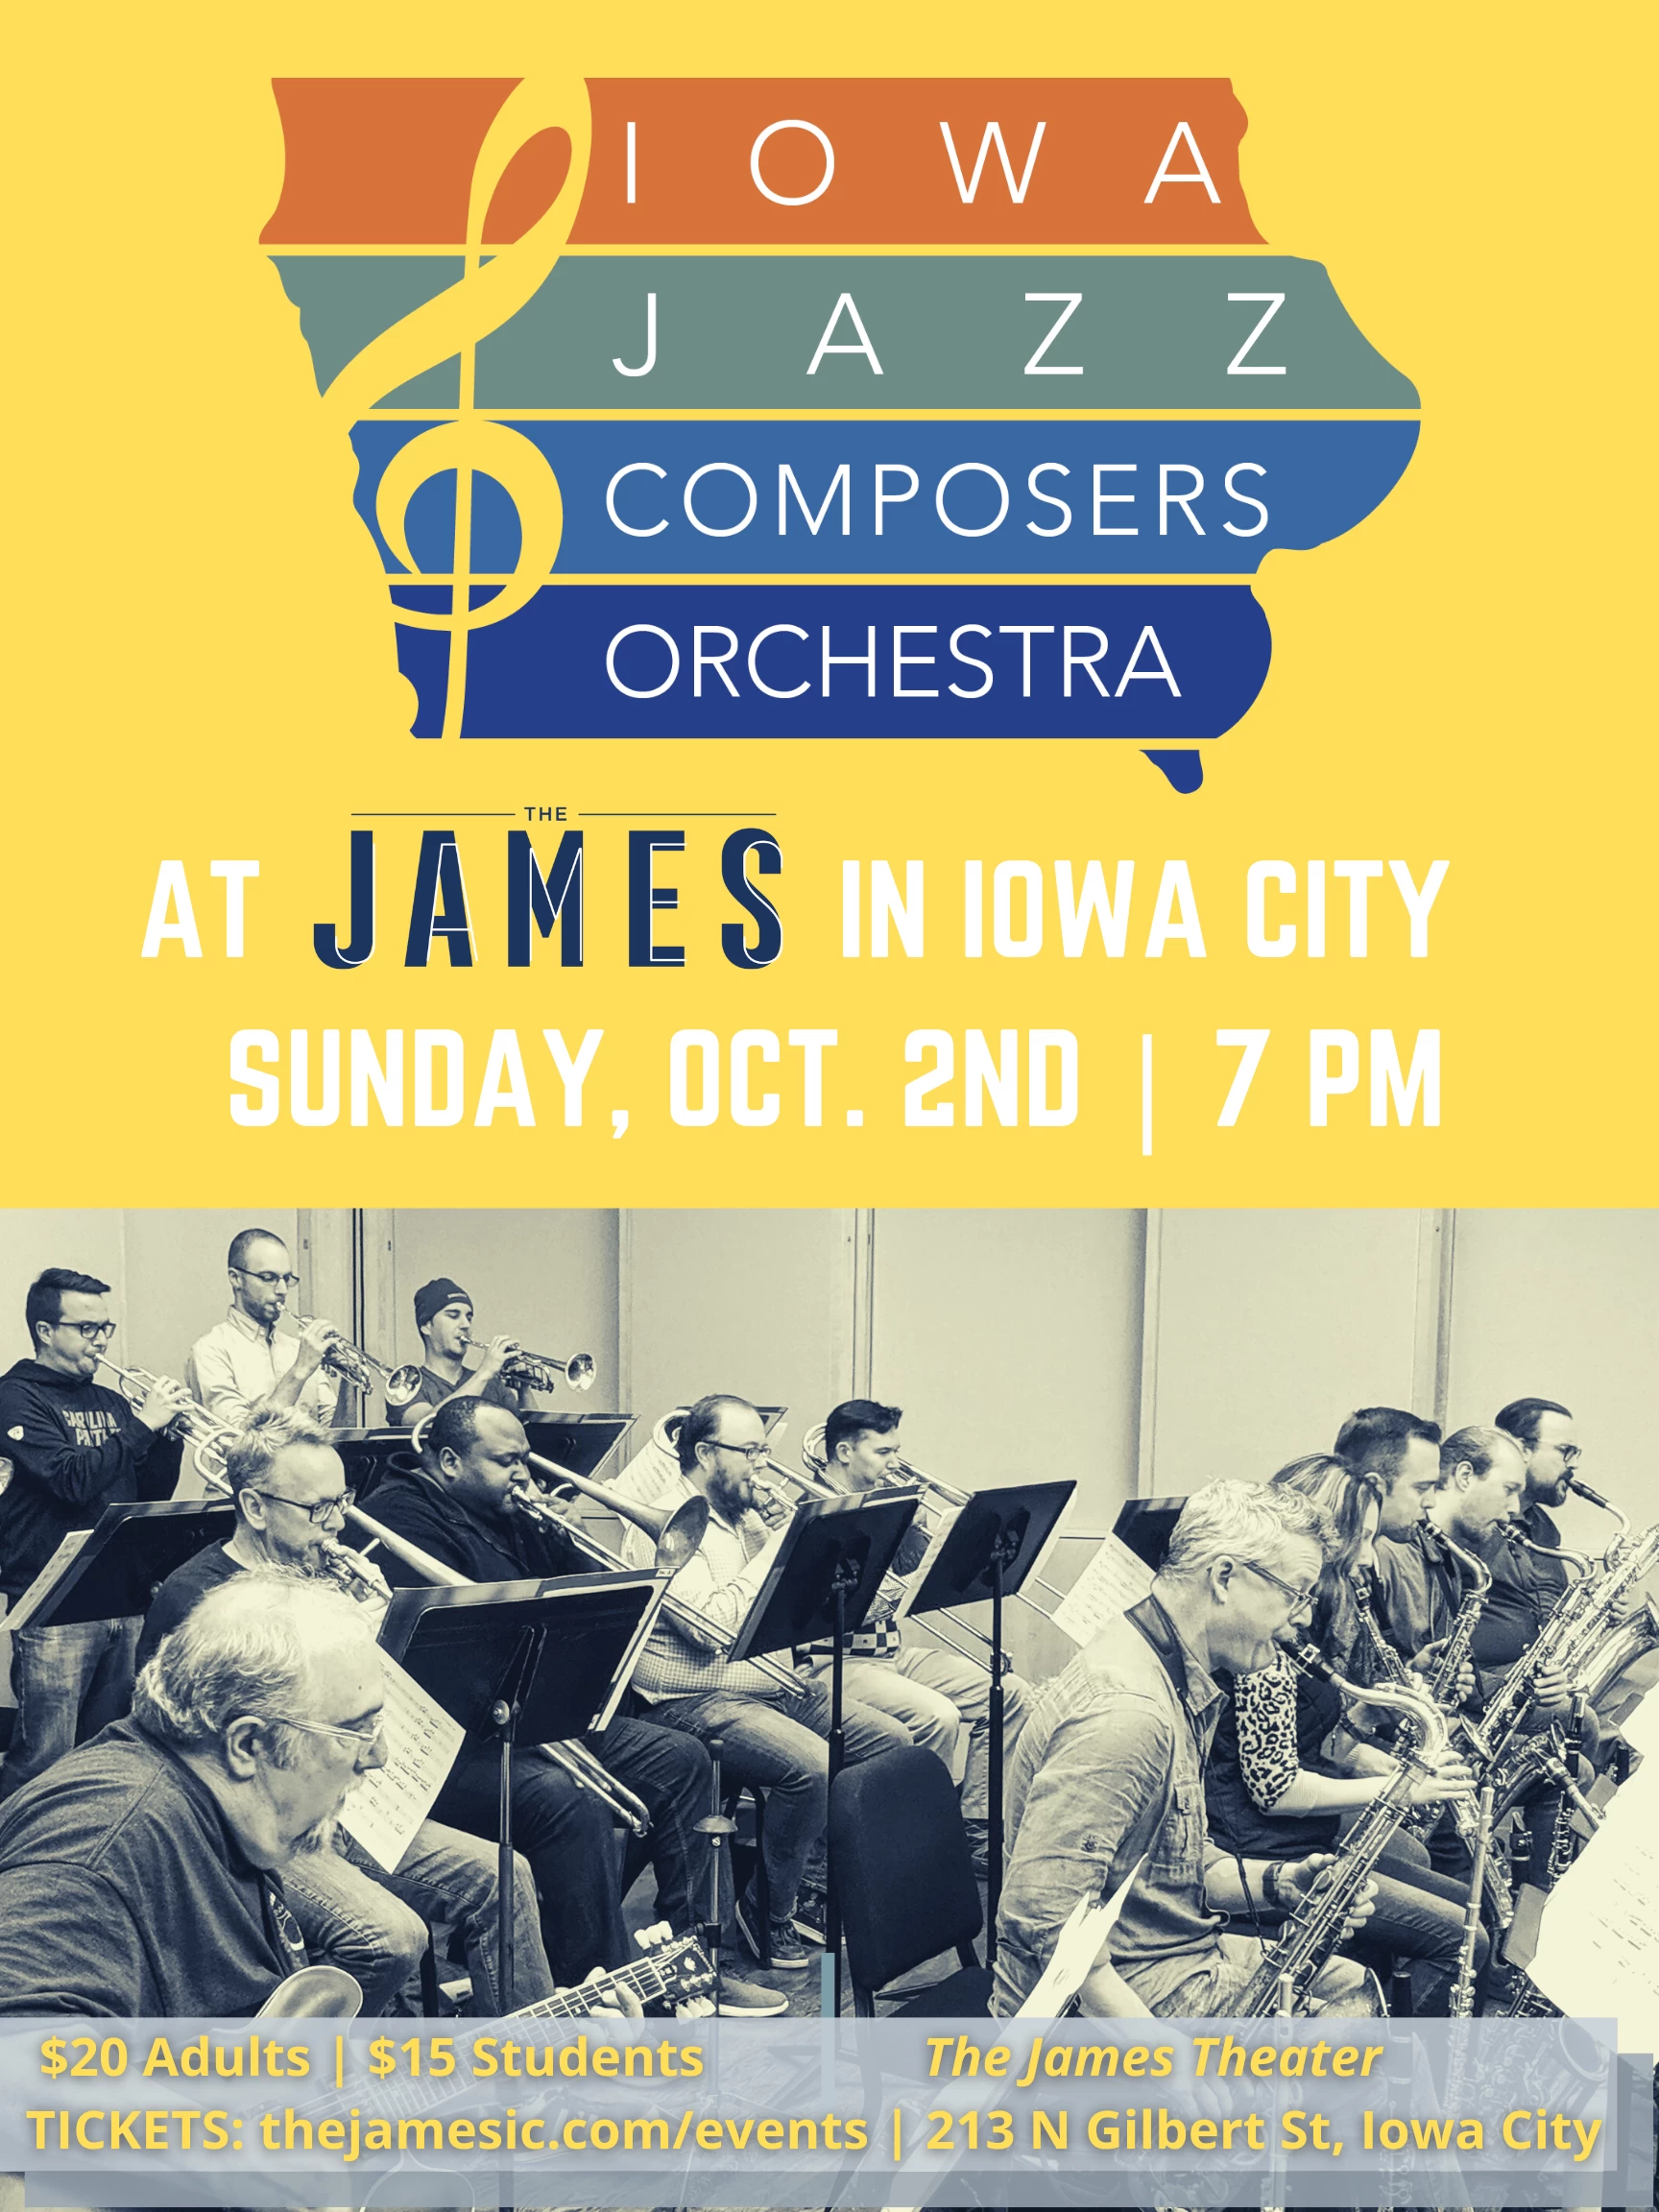 Iowa Jazz Composers Orchestra at the James Theater